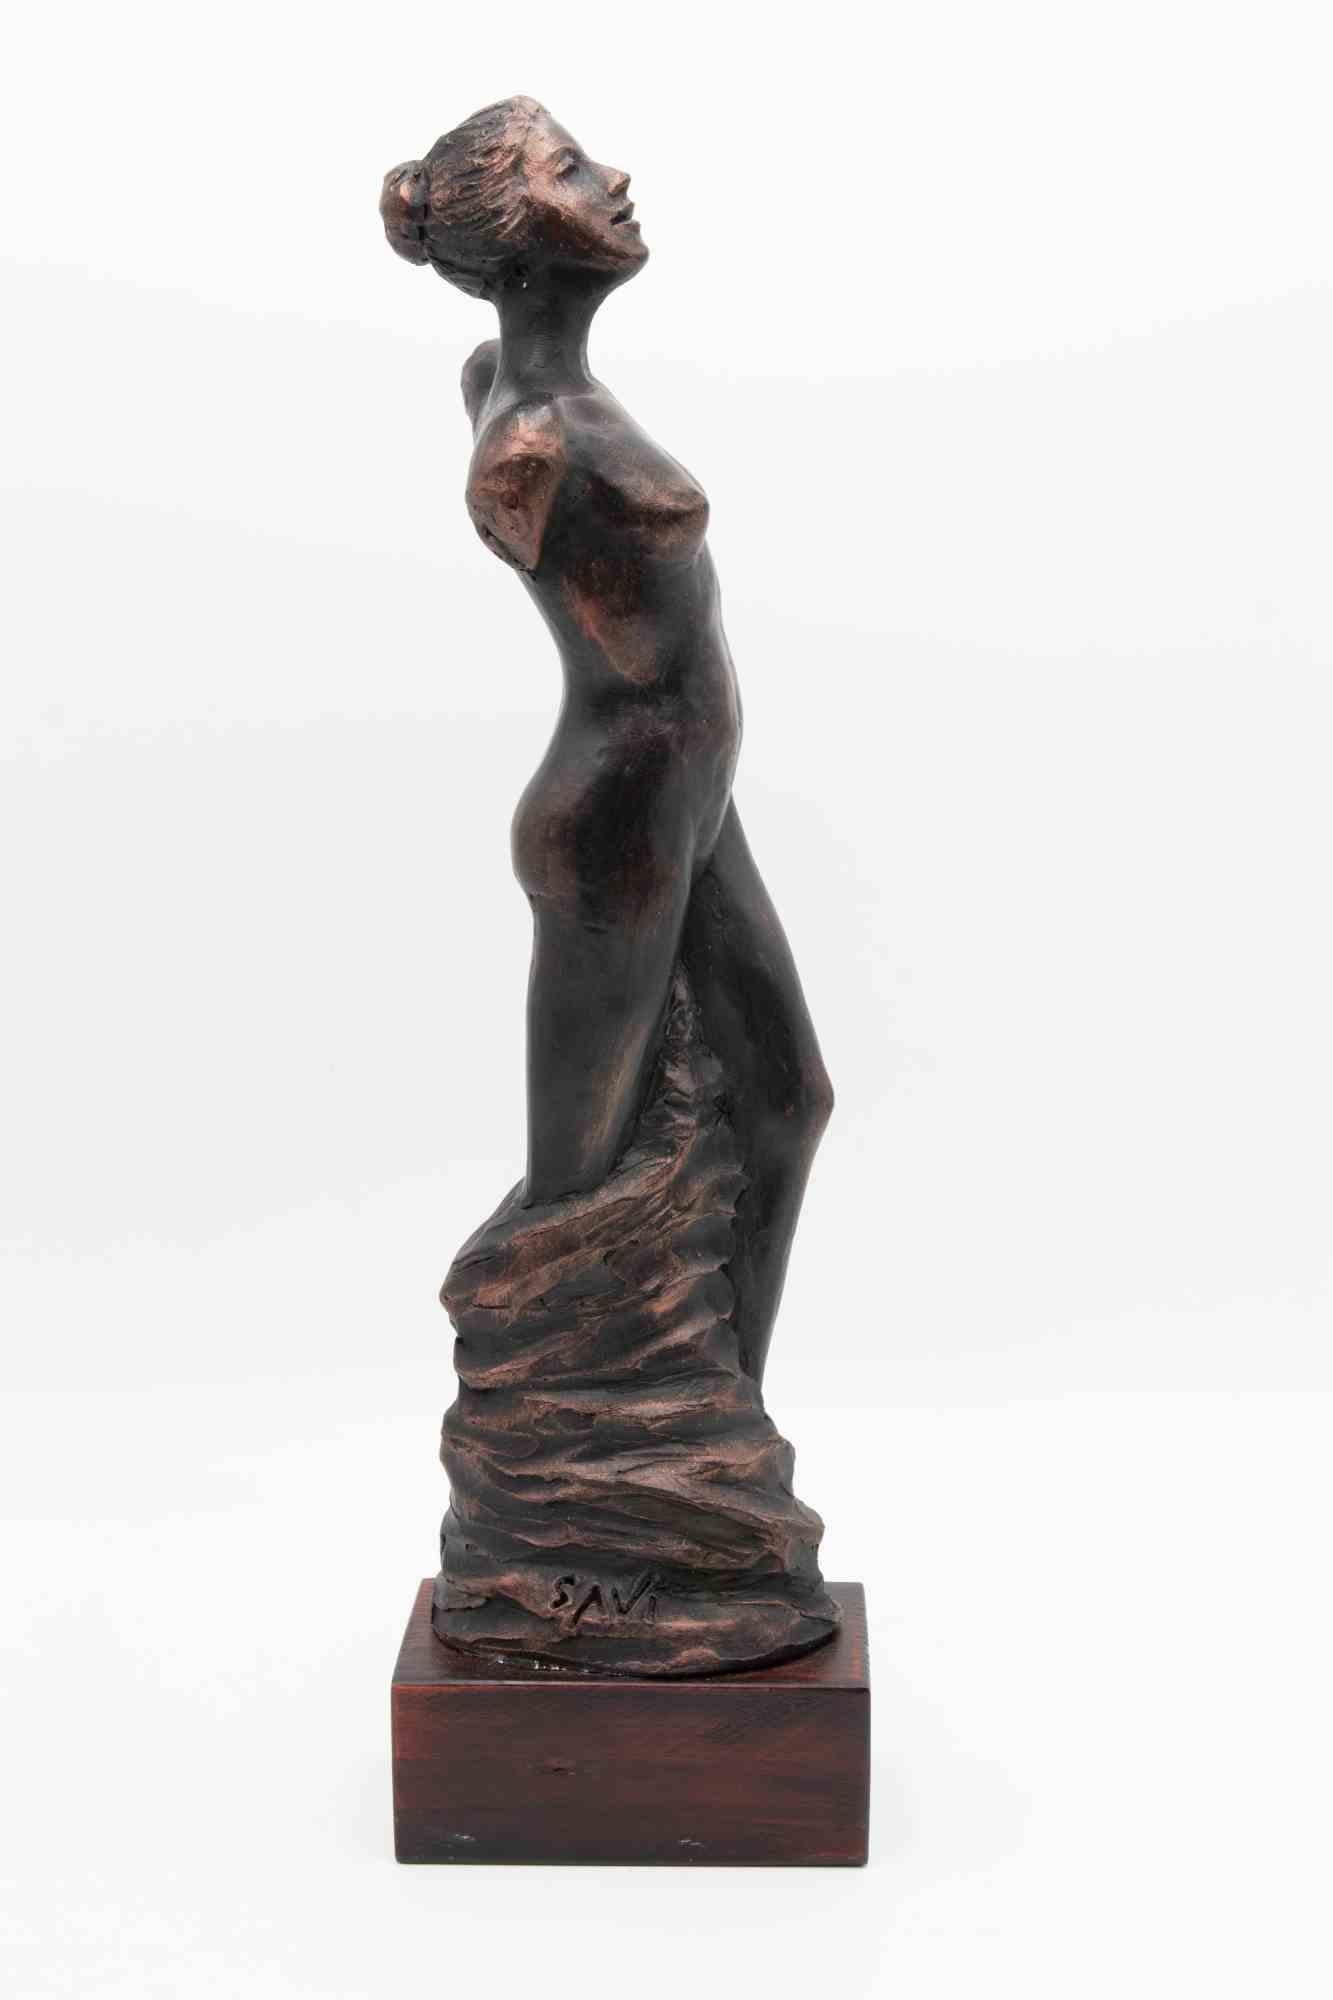 Statue of a woman is a sculpture realized by Fabrizio Savi in the 2000s. 

Female body facing upwards. The woman's legs are strongly tied to their bronze base firmly on the ground and sketched.

43x12 cm with wooden base included.

Signature